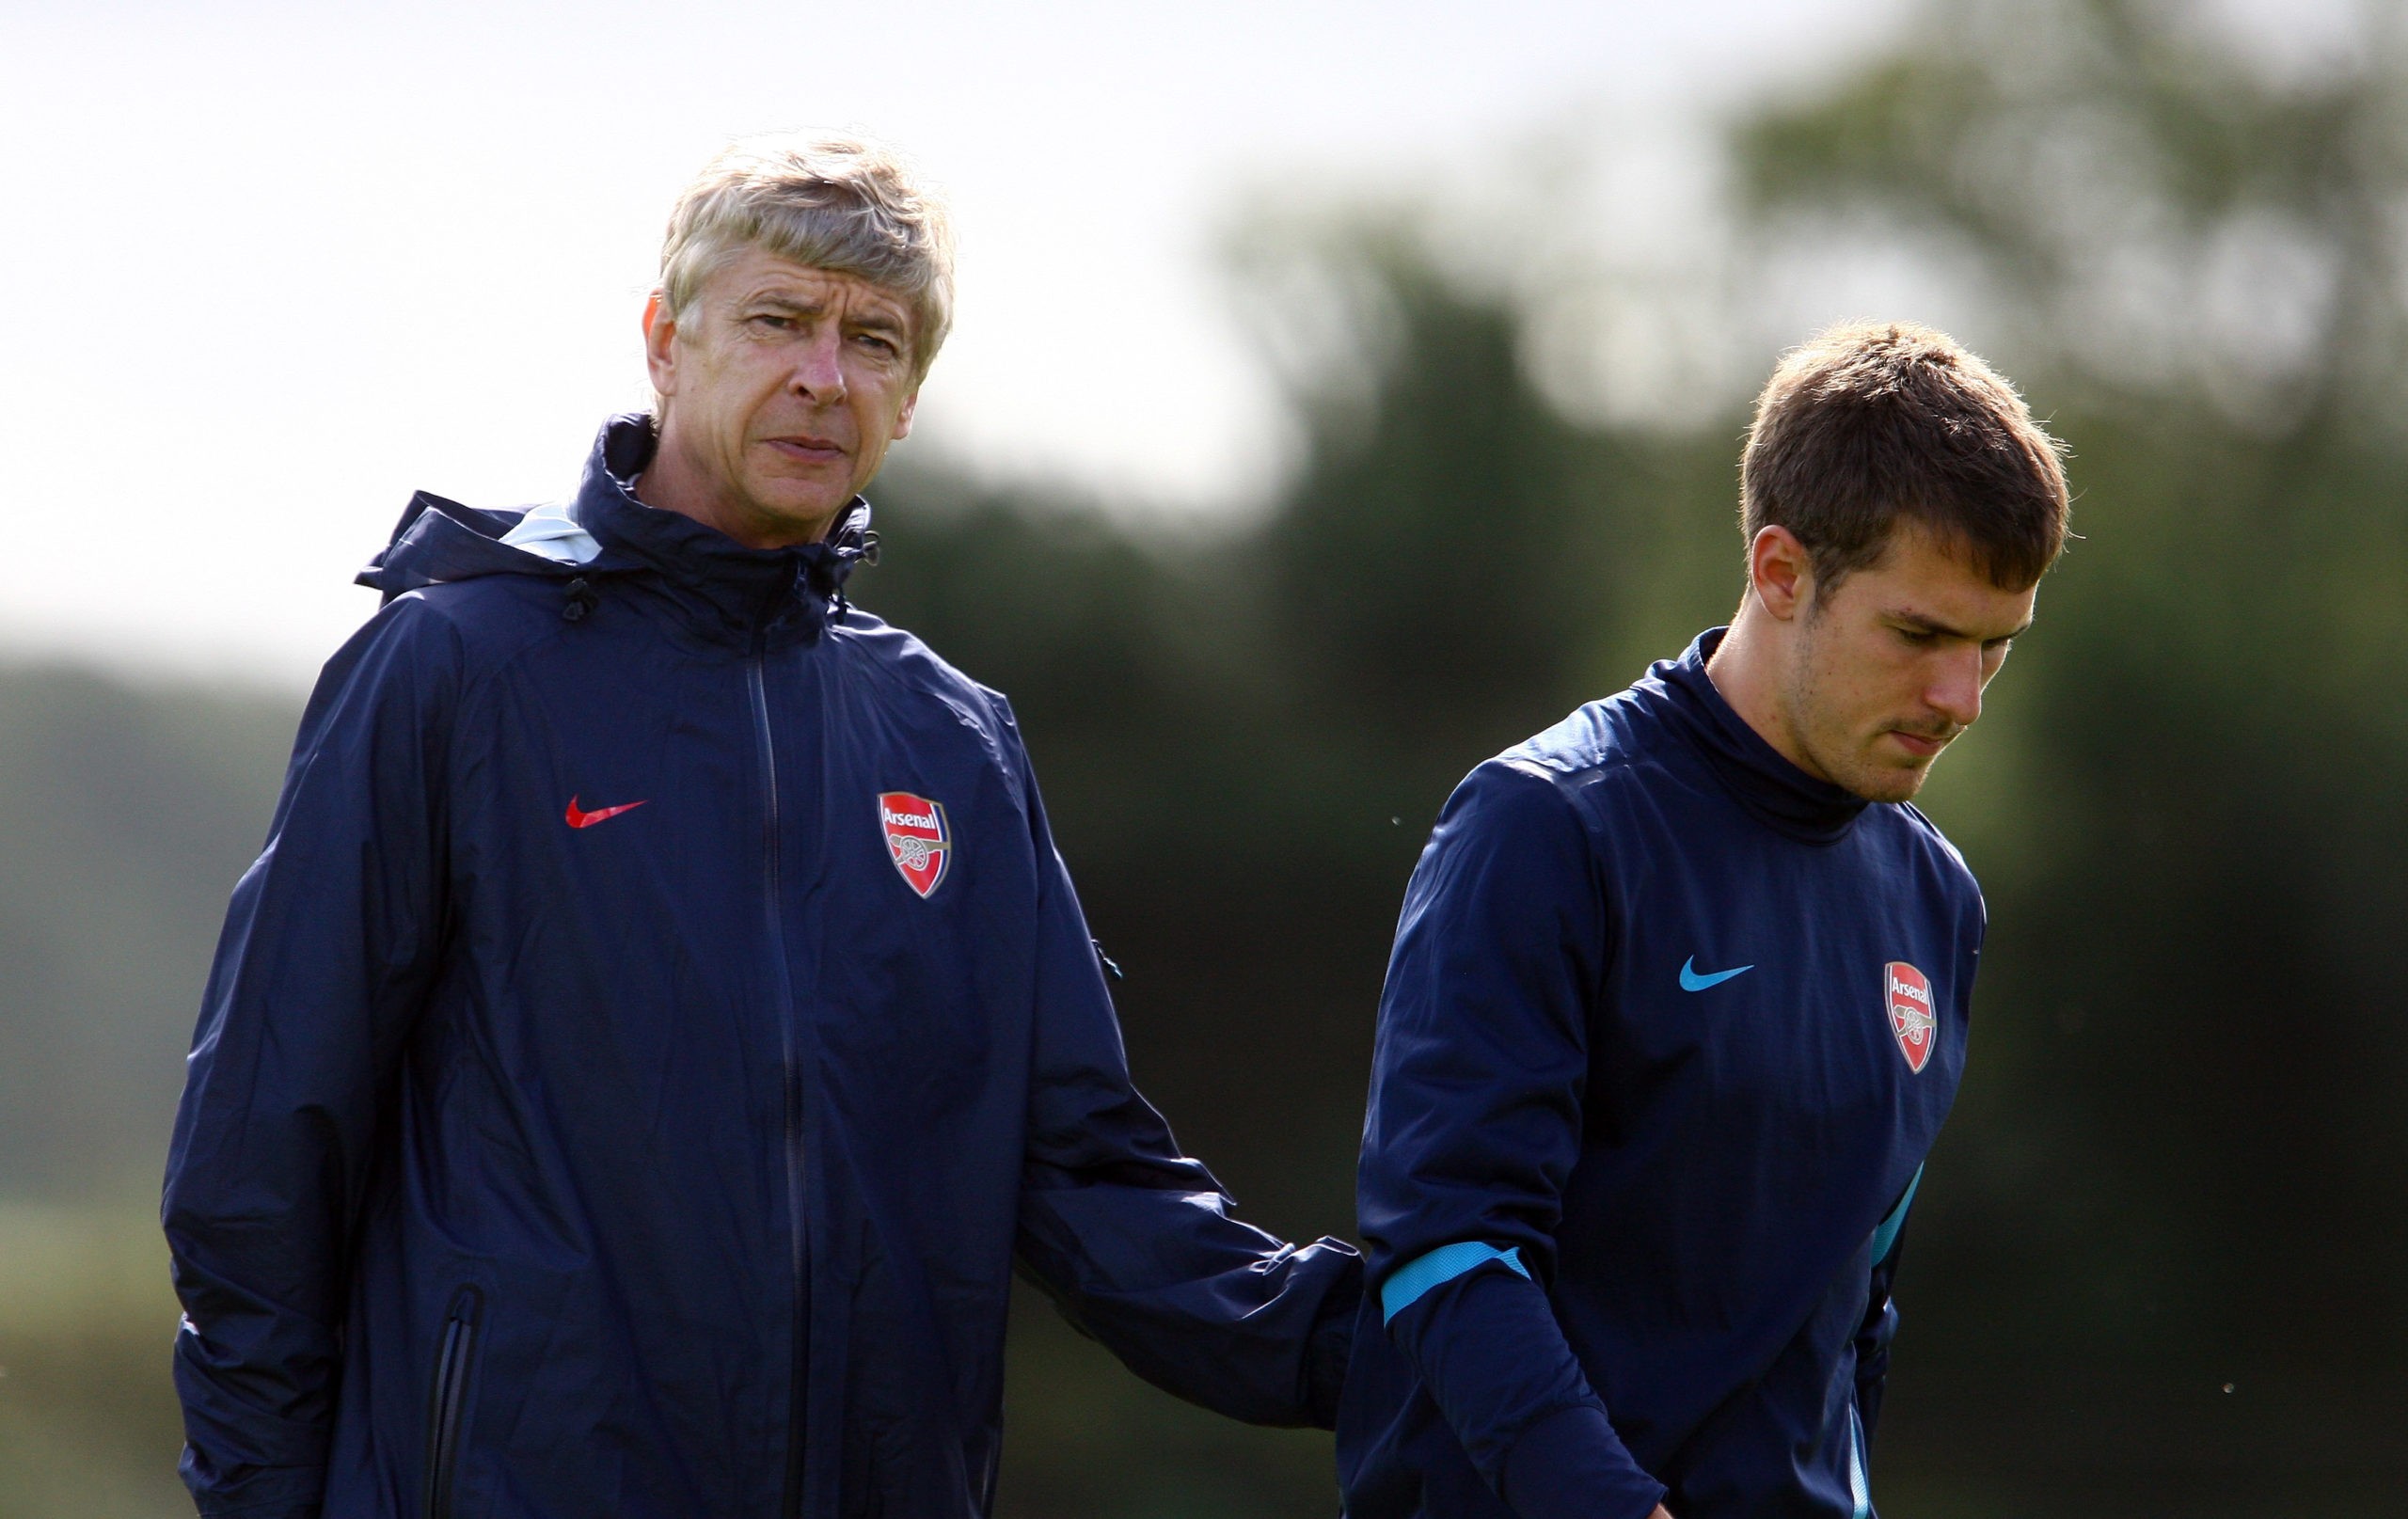 ST ALBANS, ENGLAND - SEPTEMBER 12:  Arsene Wenger, manager of Arsenal with Aaron Ramsey of Arsenal during a training session ahead of their UEFA Champions League Group match against Borussia Dortmund at London Colney on September 12, 2011 in St Albans, England.  (Photo by Julian Finney/Getty Images)